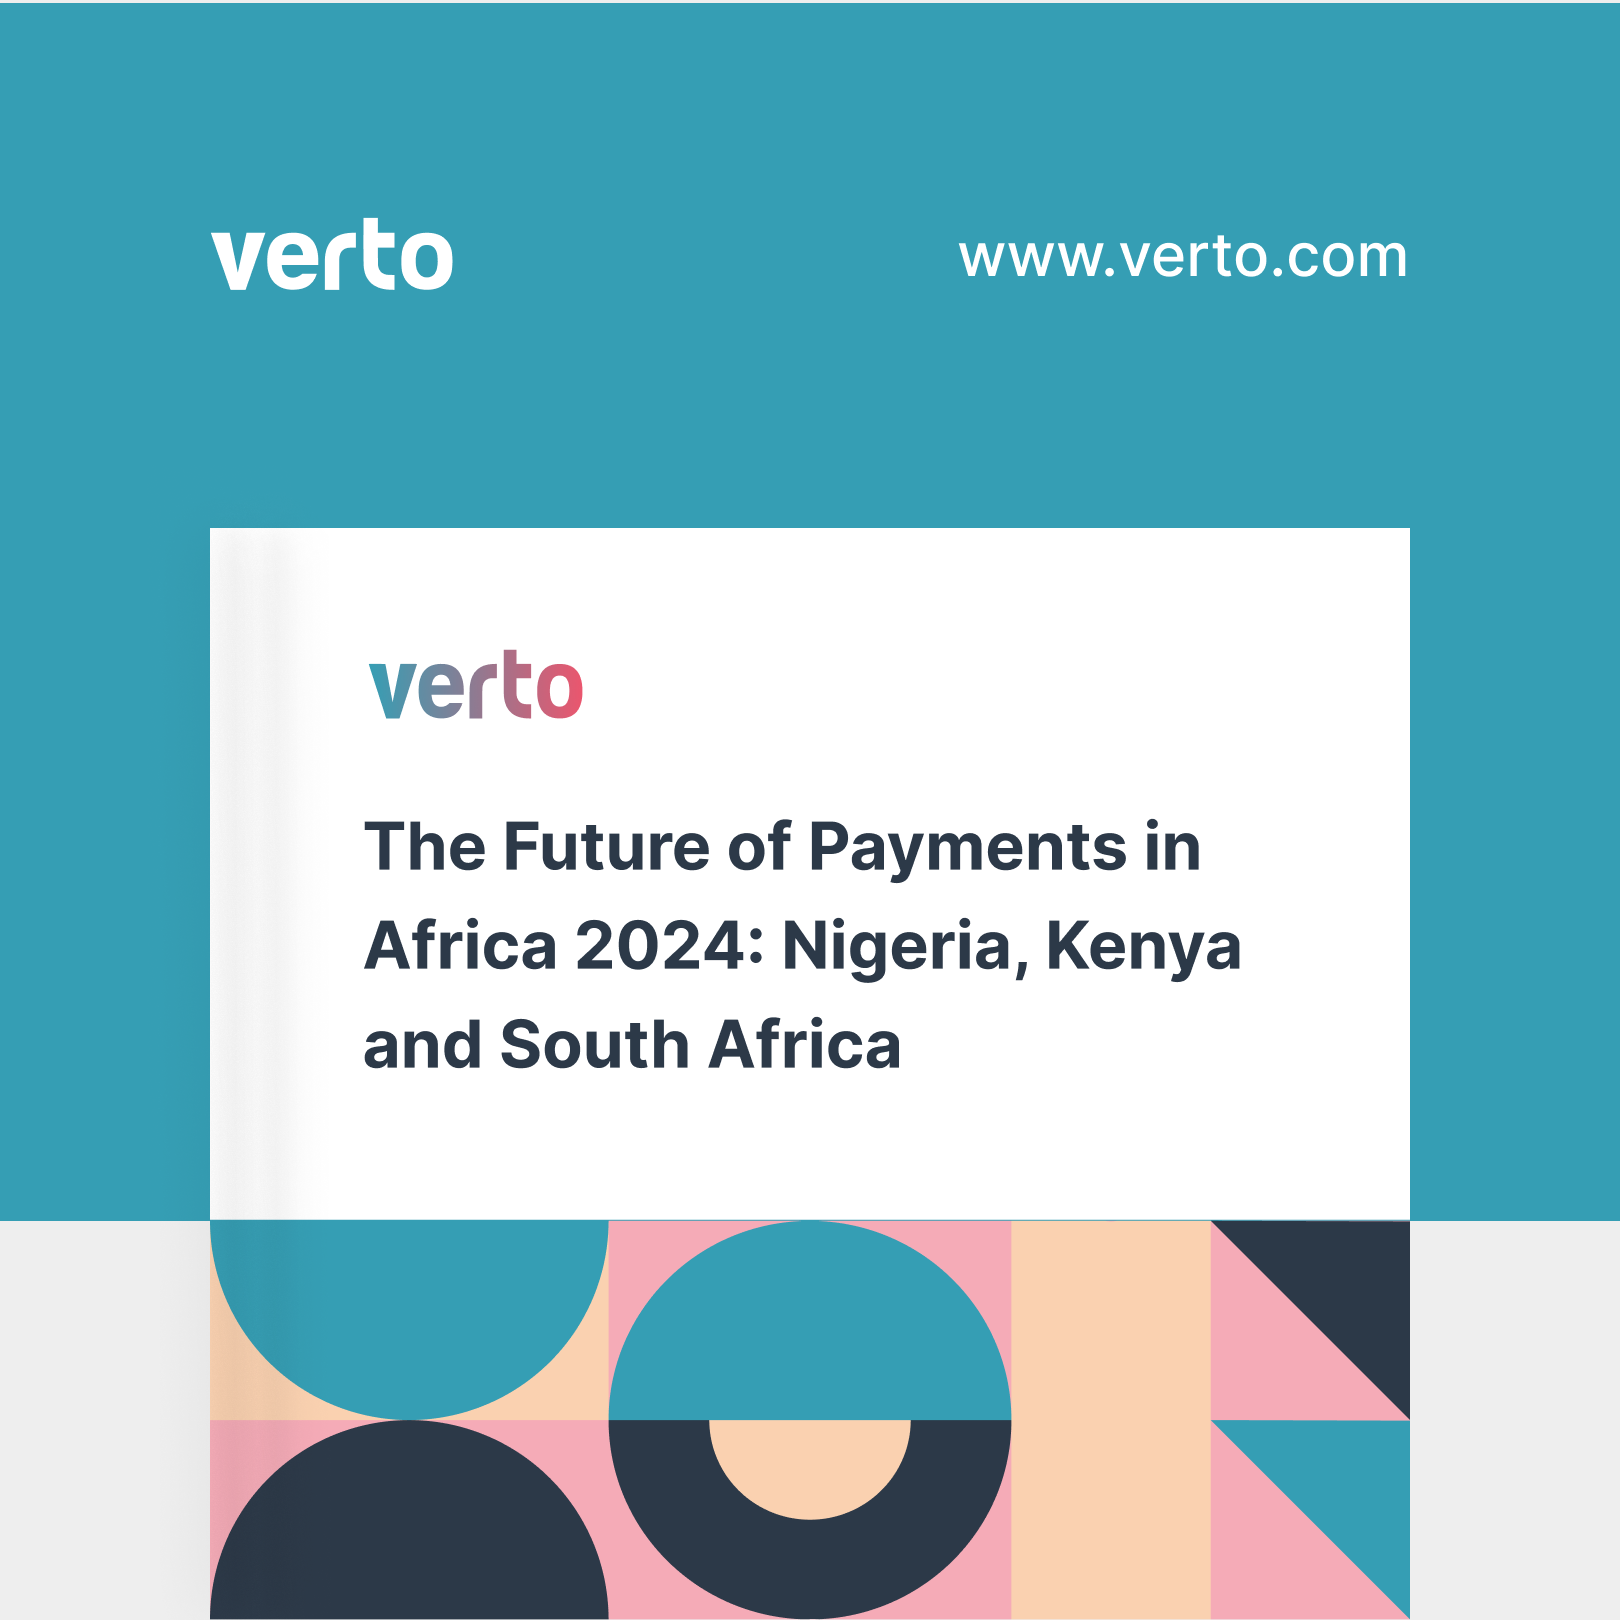 The Future of Payments in Africa 2024 Nigeria, Kenya and South Africa